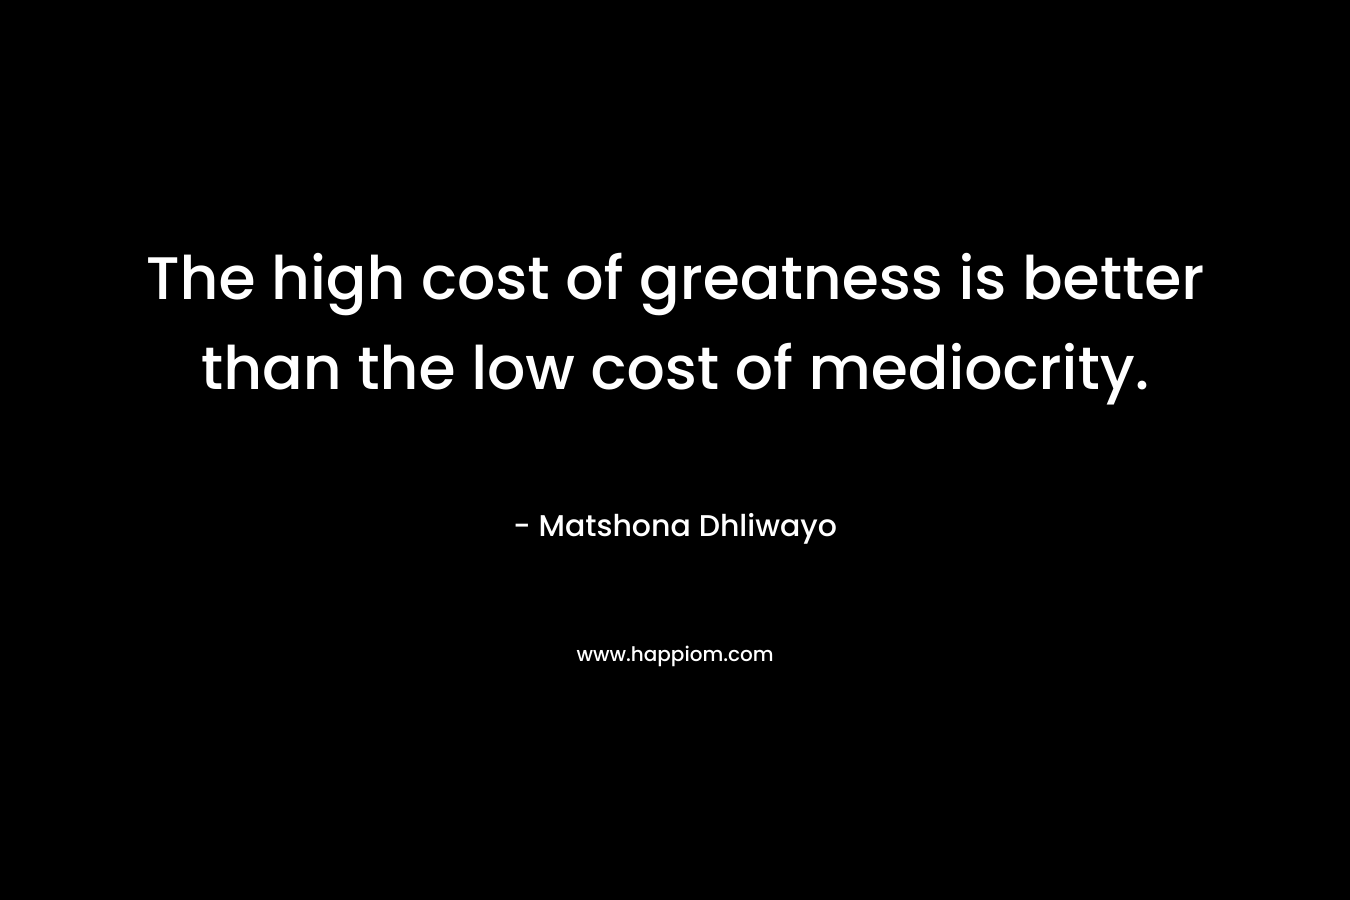 The high cost of greatness is better than the low cost of mediocrity.